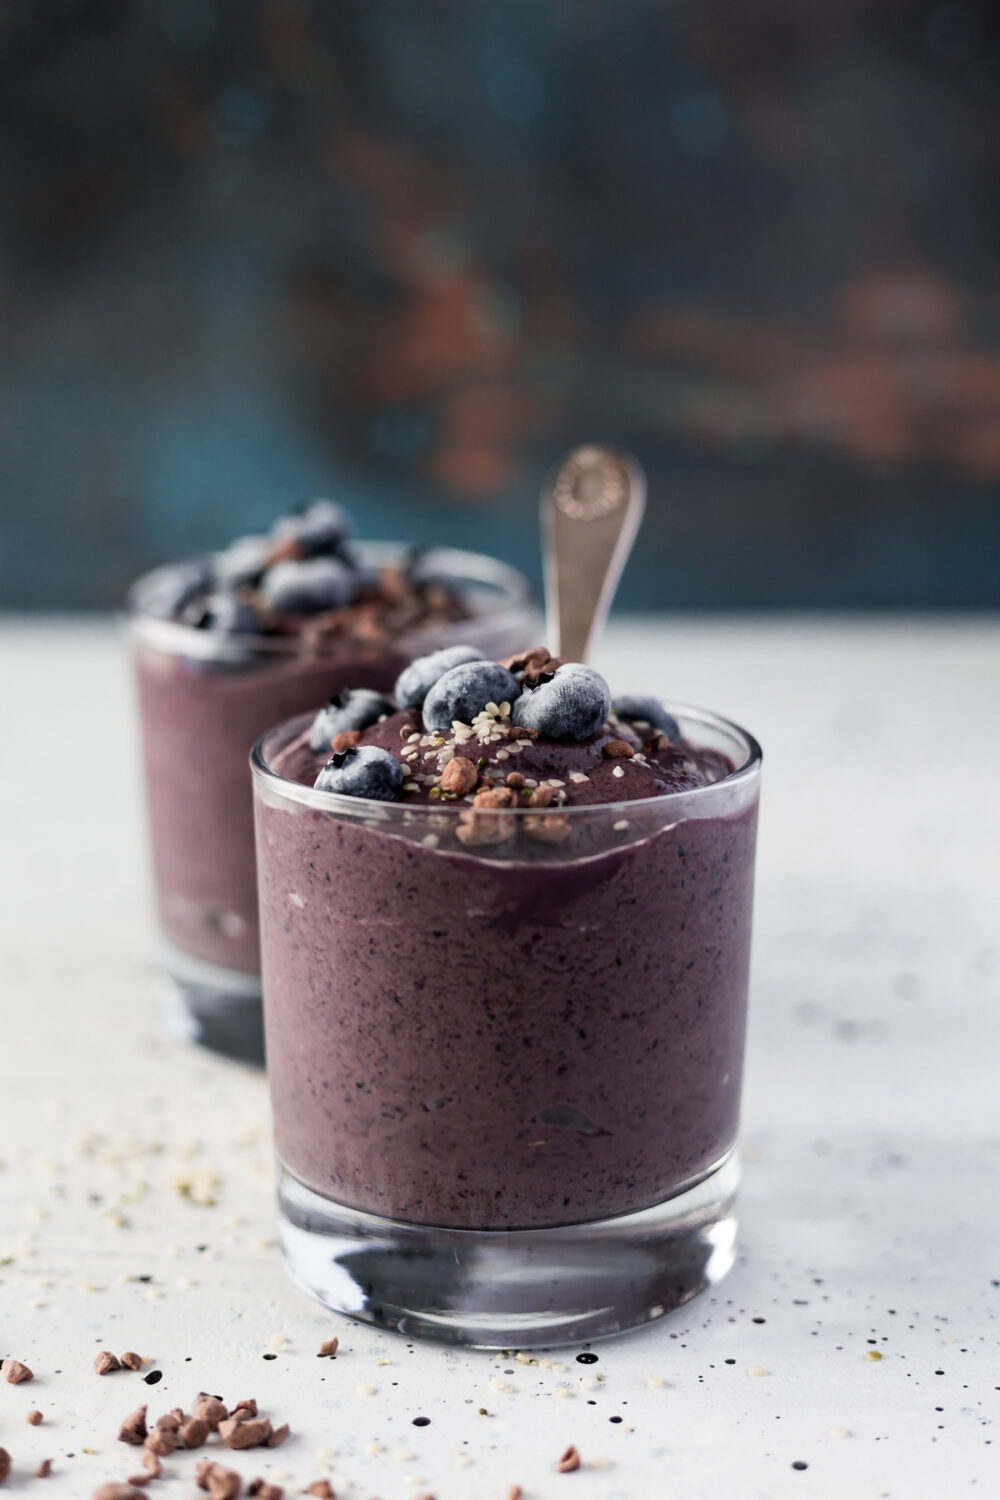 Looking for healthy breakfast smoothies? This blueberry smoothie recipe is DELISH!